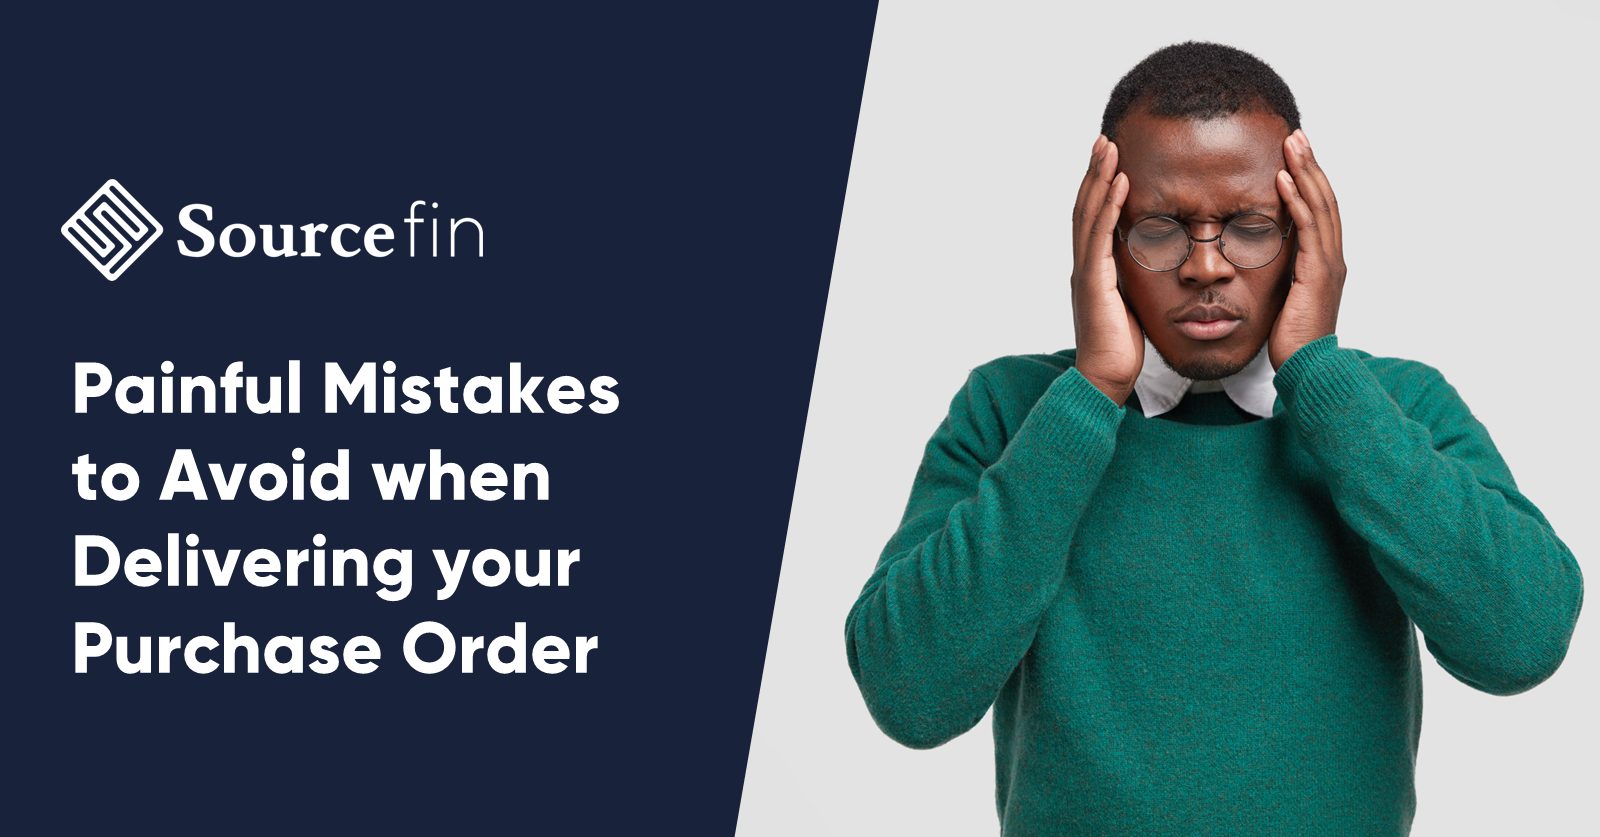 Painful Mistakes to Avoid when Delivering your Purchase Order